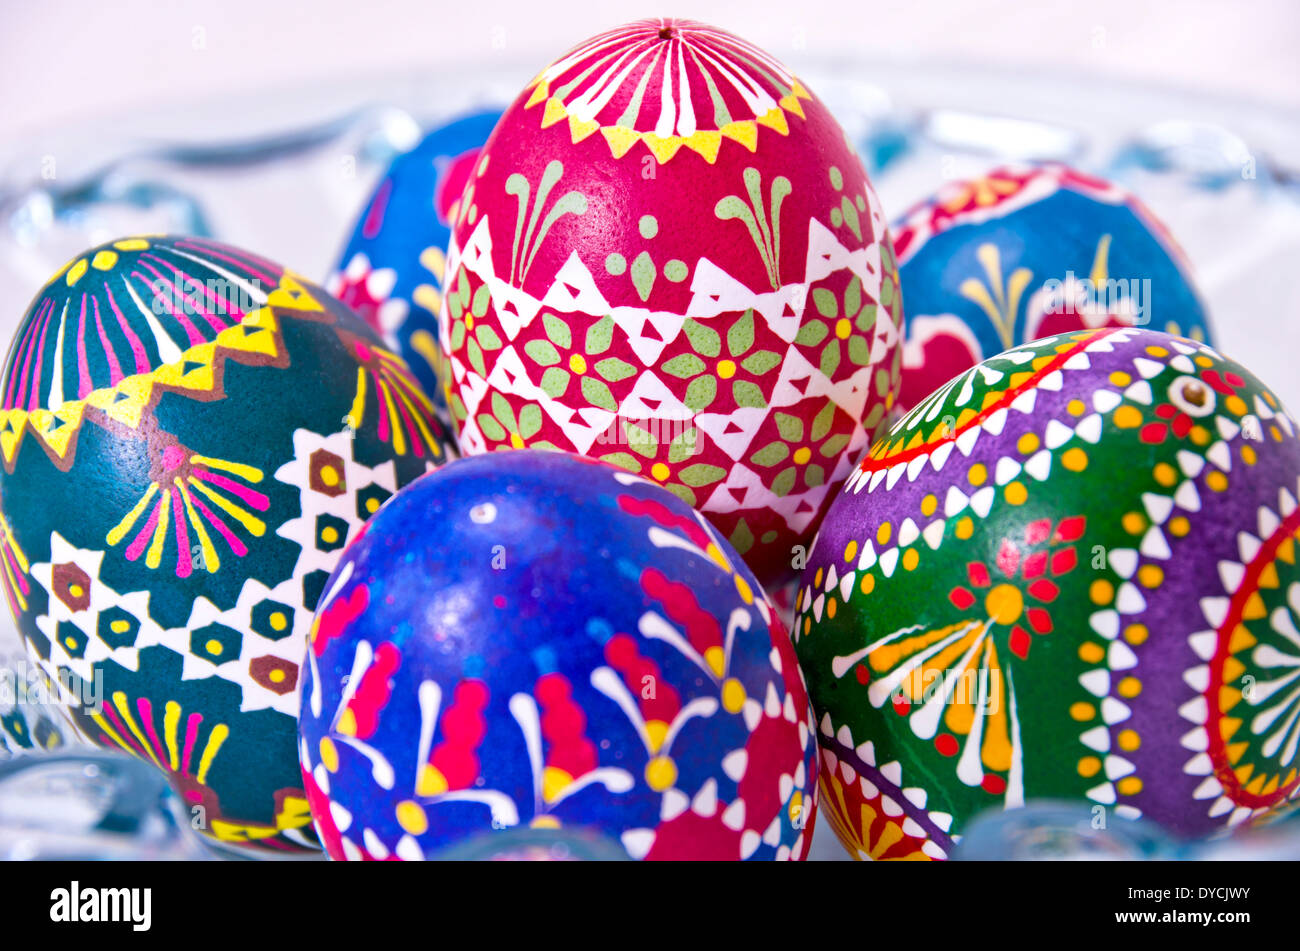 Colourful Easter Eggs In A Bowl Of Glass. Stock Photo